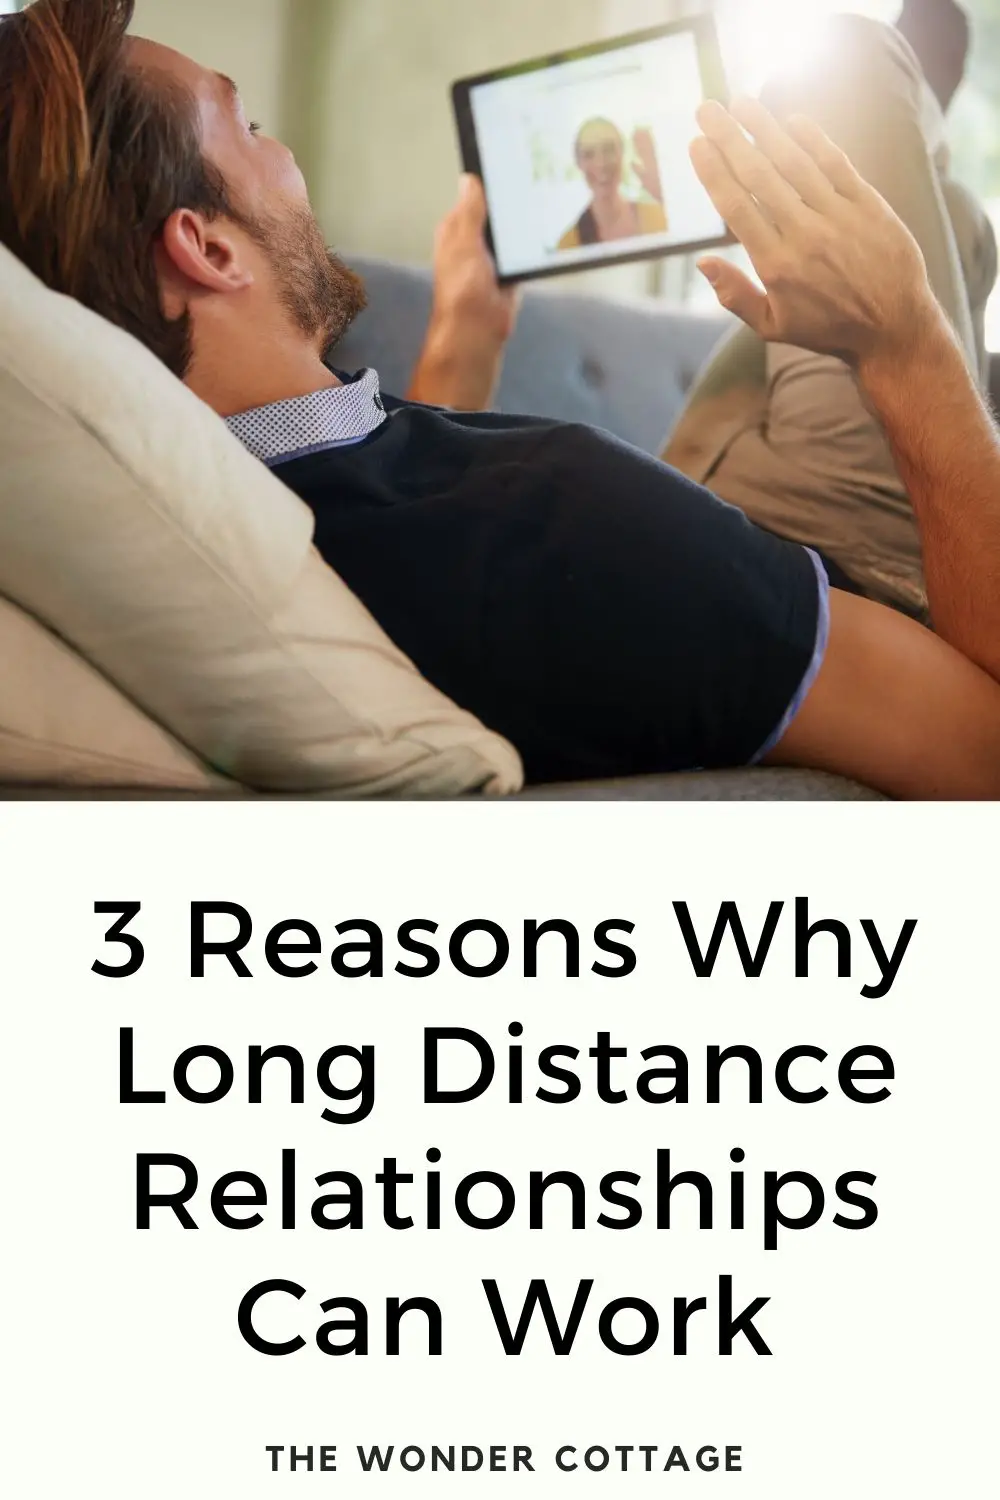 3 reasons why long distance re;lationships can work